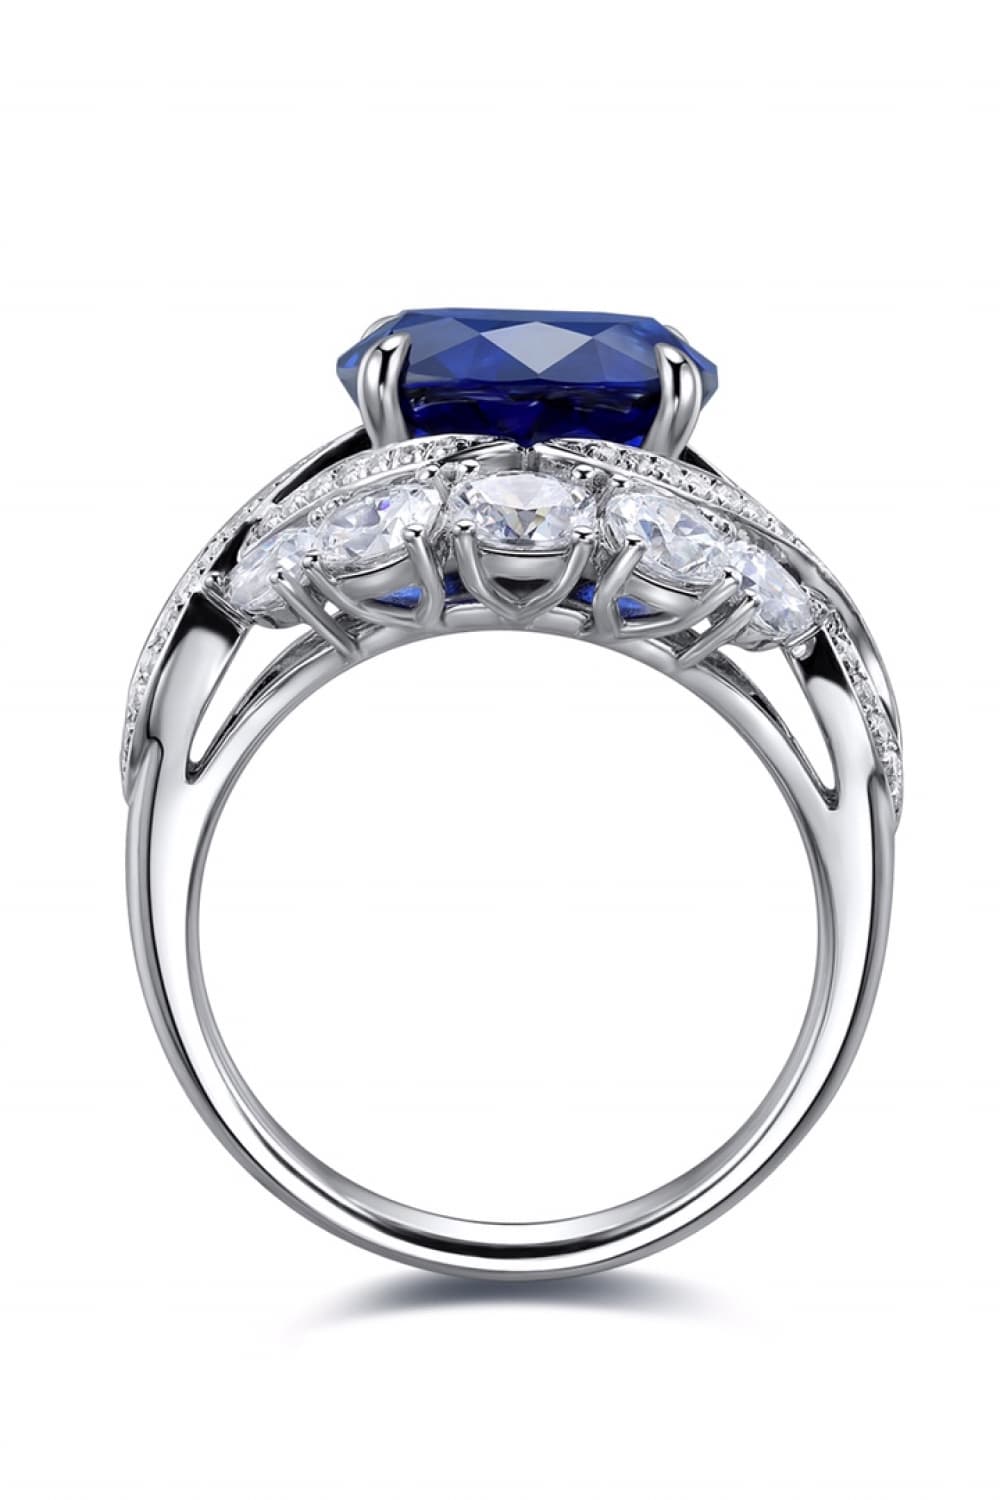 5 Carat Lab-Grown Sapphire Platinum-Plated Ring BLUE ZONE PLANET